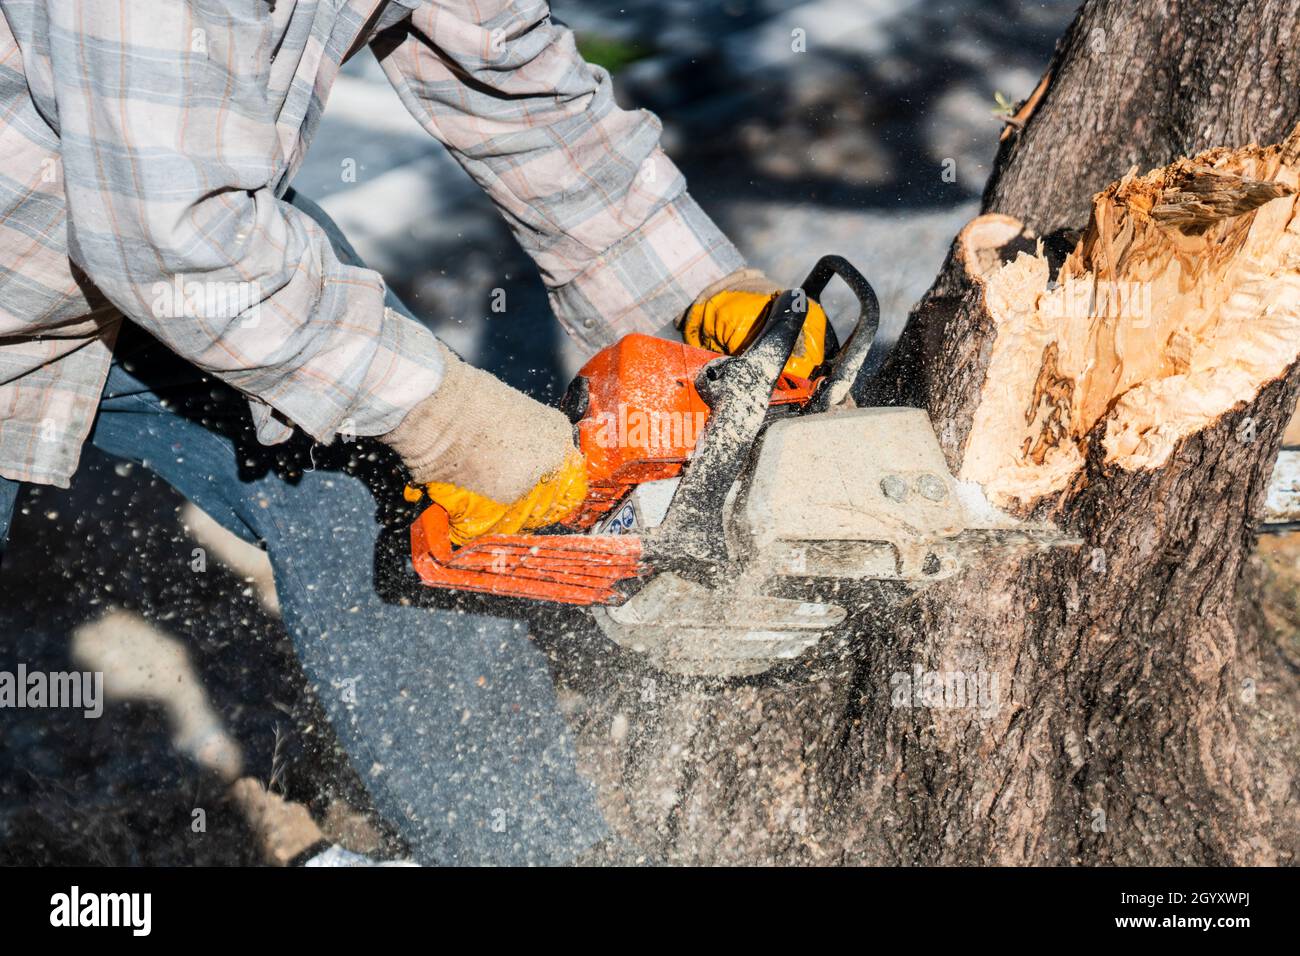 A lumberjack is sawing a tree with a chainsaw. Stock Photo